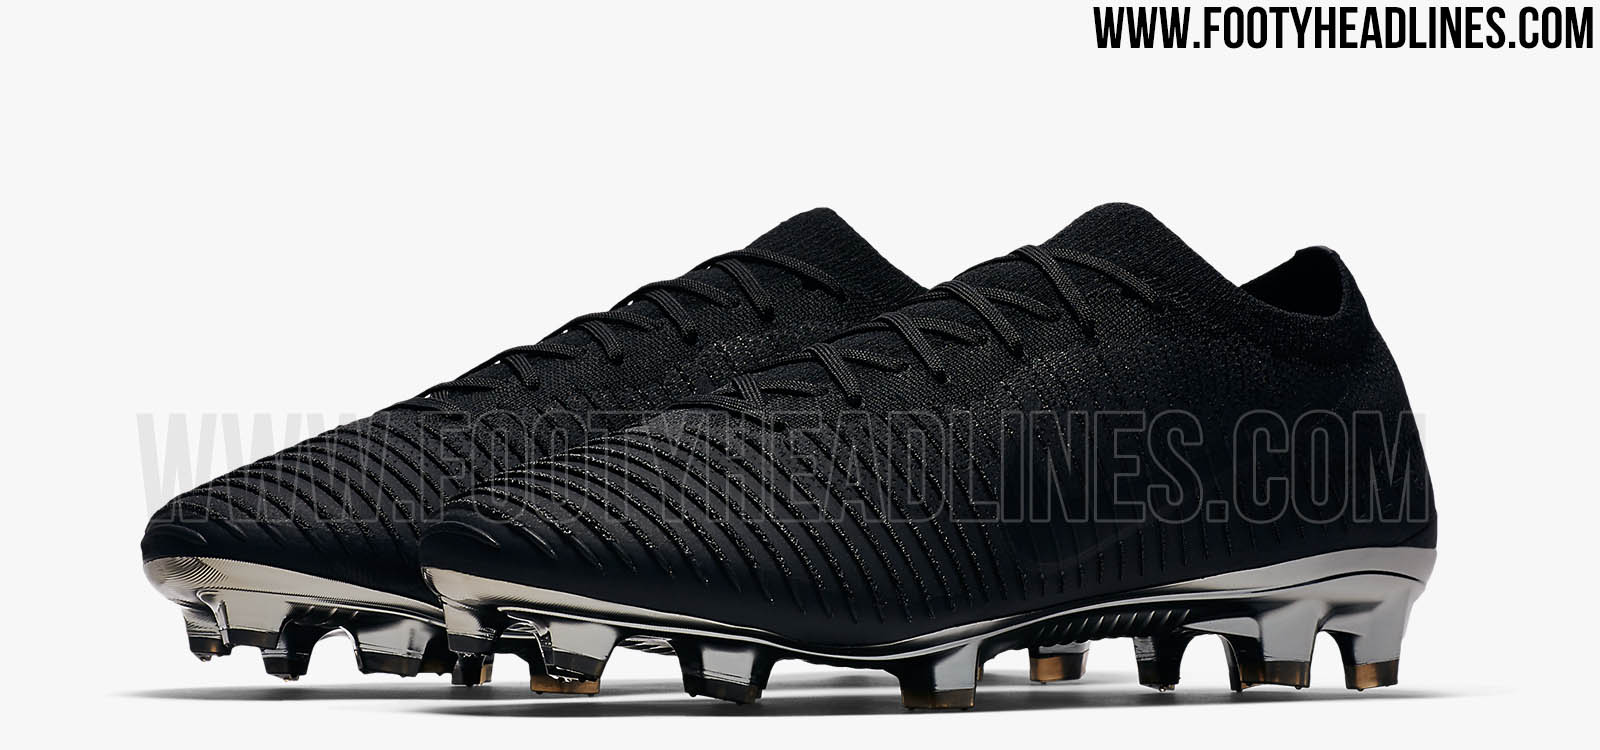 Sjældent ekspedition personificering All-New 'Stealth' Nike Flyknit Ultra Football Boot Released - Footy  Headlines